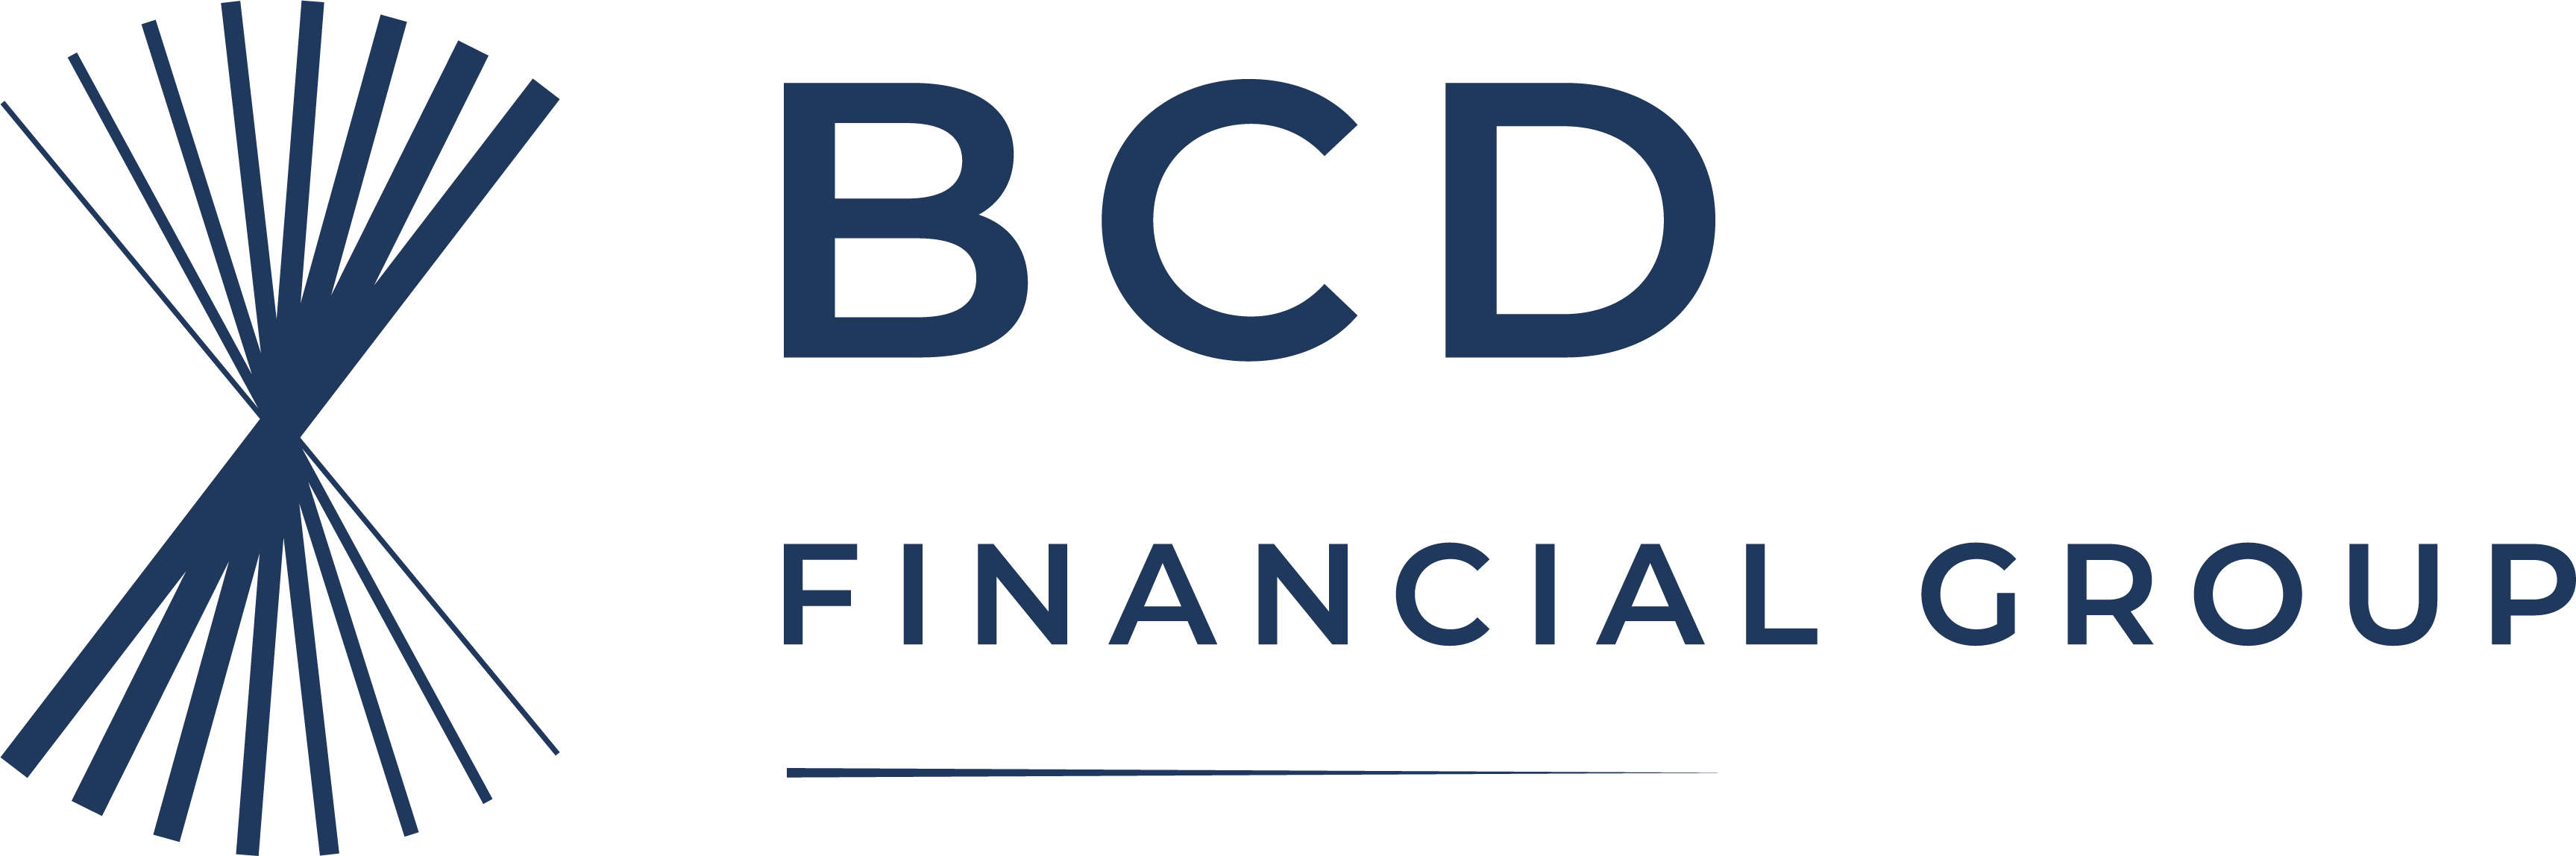 BCD Financial Group